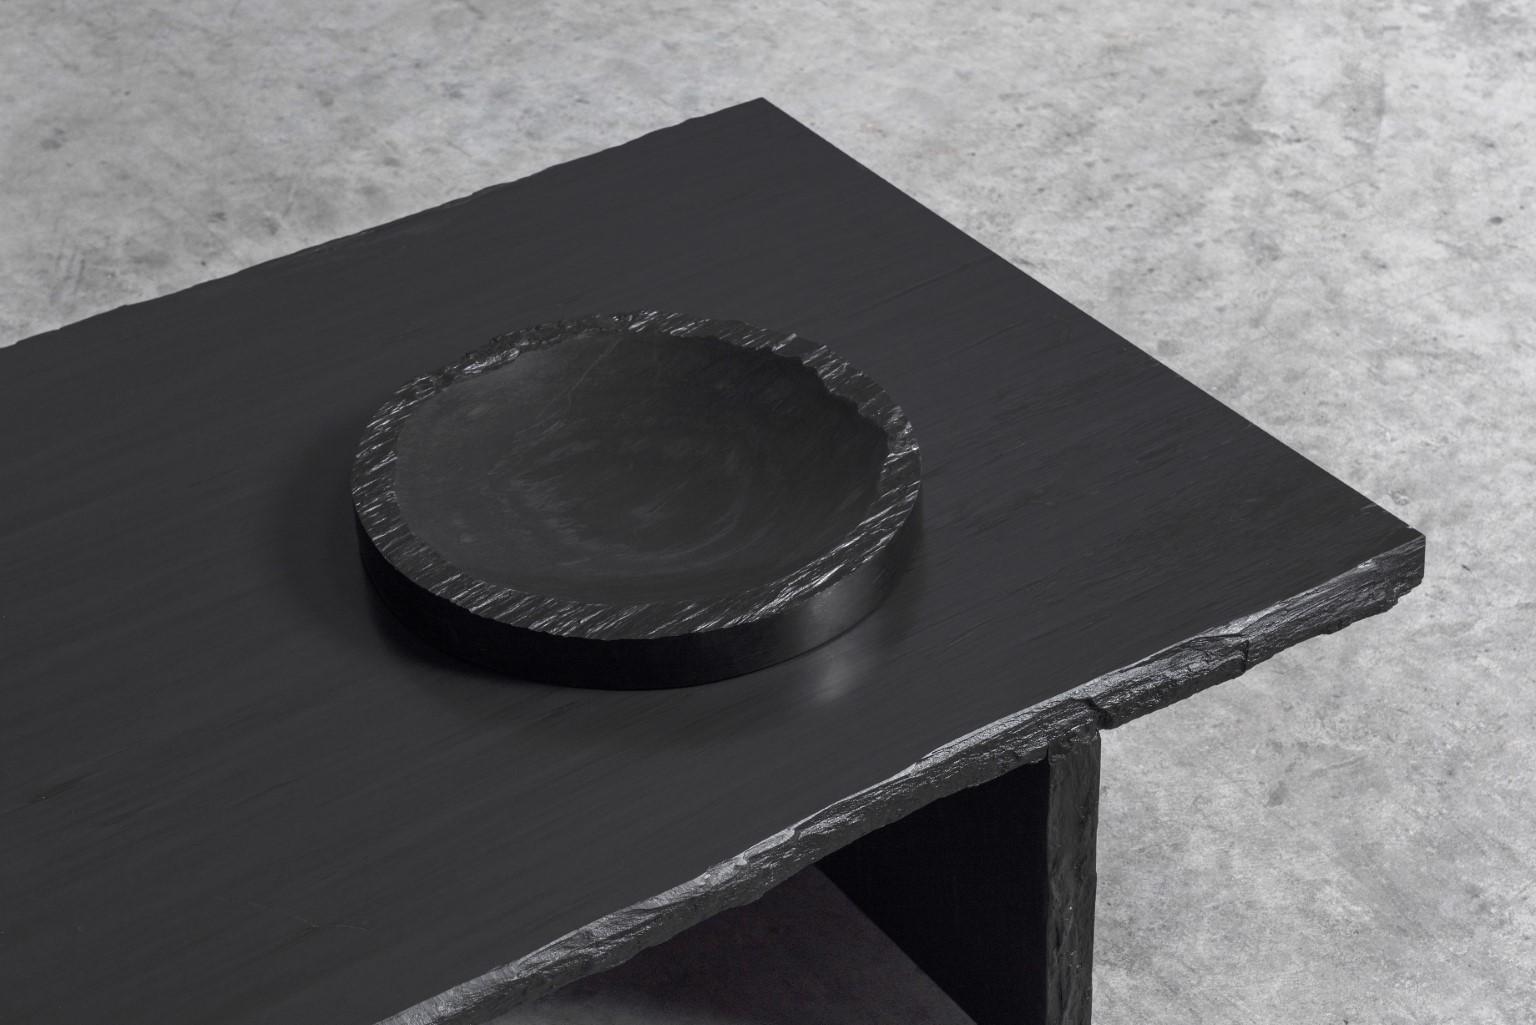 Slate sculpted center piece by Frederic Saulou
Center piece
Black Slate
Measures: H 6, D 32 cm, approximately 20 kg
Limited edition of 20
Signed and numbered.

